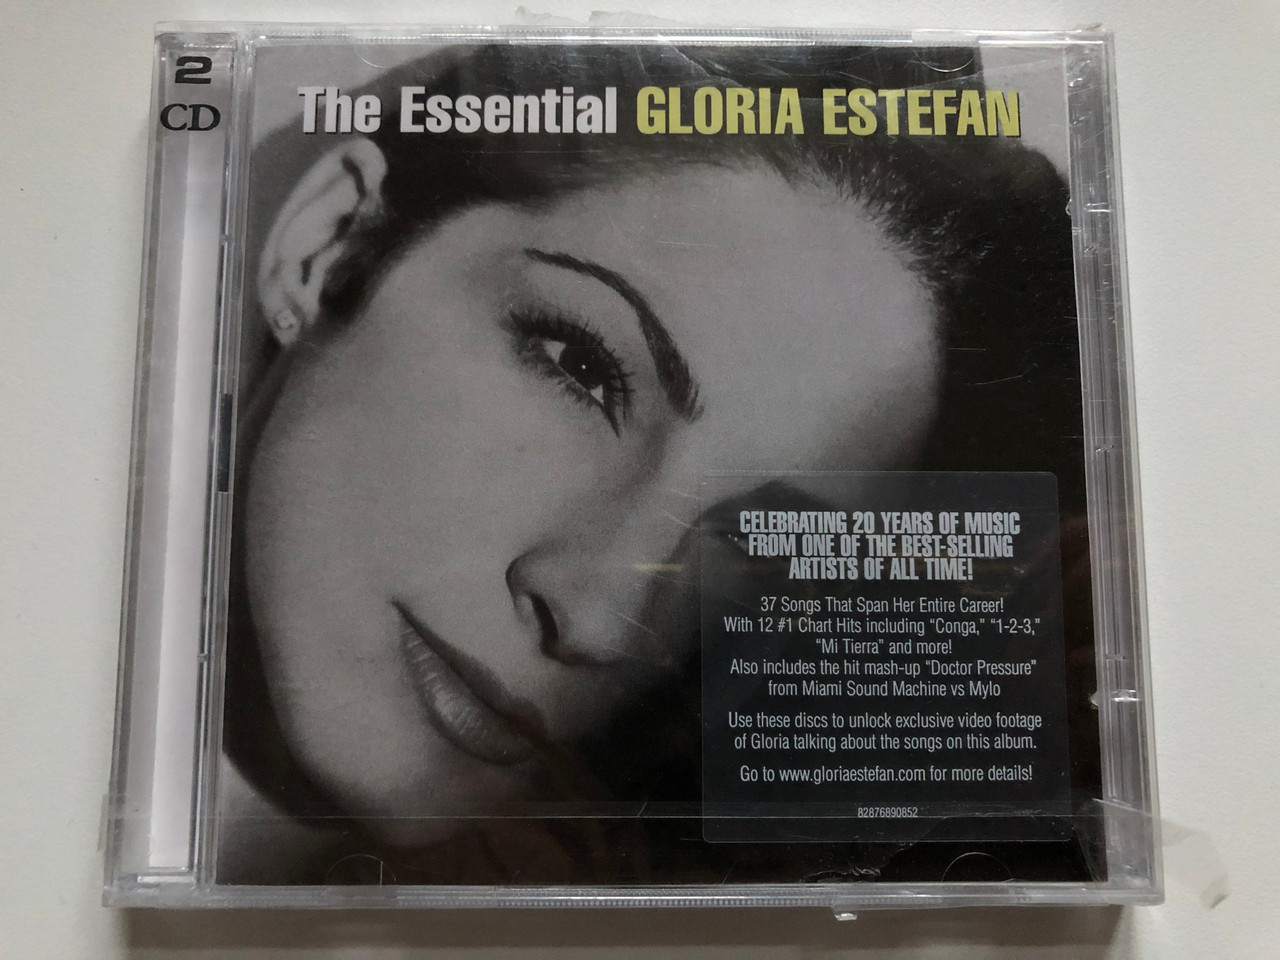 https://cdn10.bigcommerce.com/s-62bdpkt7pb/products/0/images/250026/The_Essential_Gloria_Estefan_Celebrating_20_Years_Of_Music_From_One_Of_The_Best-Selling_Artists_Of_All_Time_37_Songs_That_Span_Her_Entire_Carrer_With_12_1_Chart_Hits_including_Conga_1__76007.1661162344.1280.1280.JPG?c=2&_gl=1*1idsefy*_ga*MjA2NTIxMjE2MC4xNTkwNTEyNTMy*_ga_WS2VZYPC6G*MTY2MTE1MDA1NS41MzMuMS4xNjYxMTYyMDk3LjUyLjAuMA..